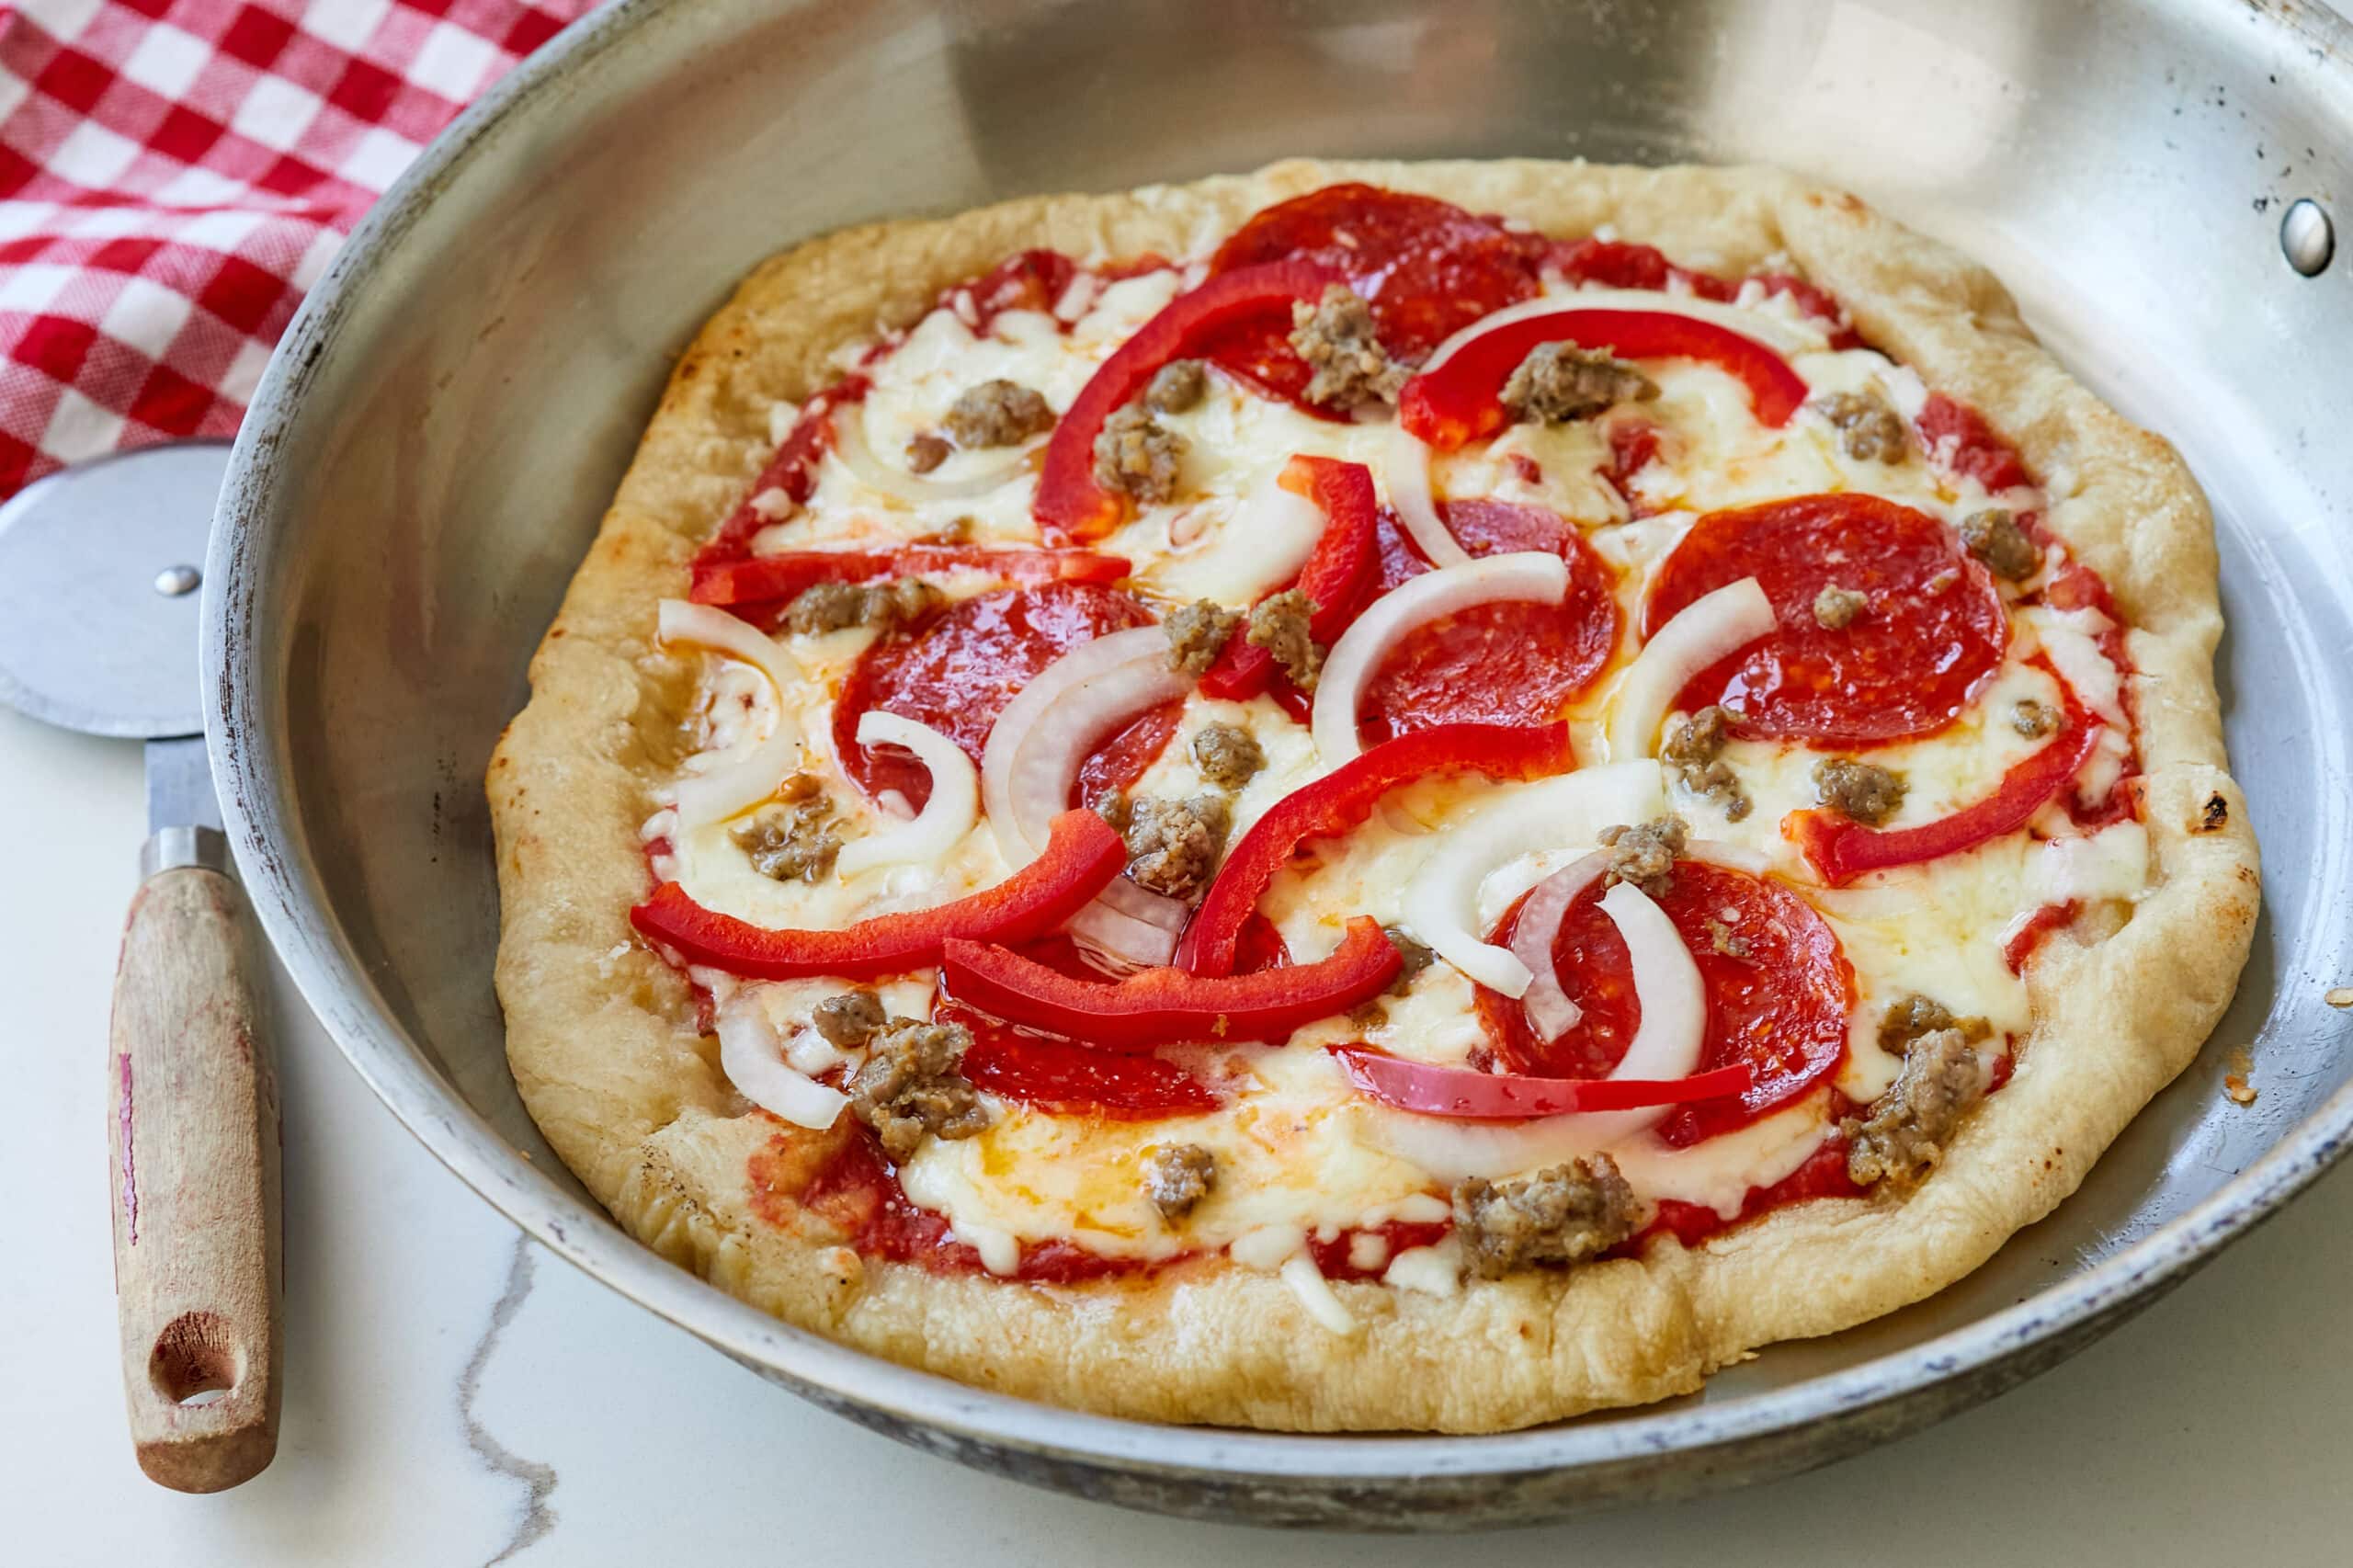 Pan-Fried Pizza (Stovetop, no oven) has a crispy-edge crust loaded with melted cheese, peppers, sausages, and pepperoni